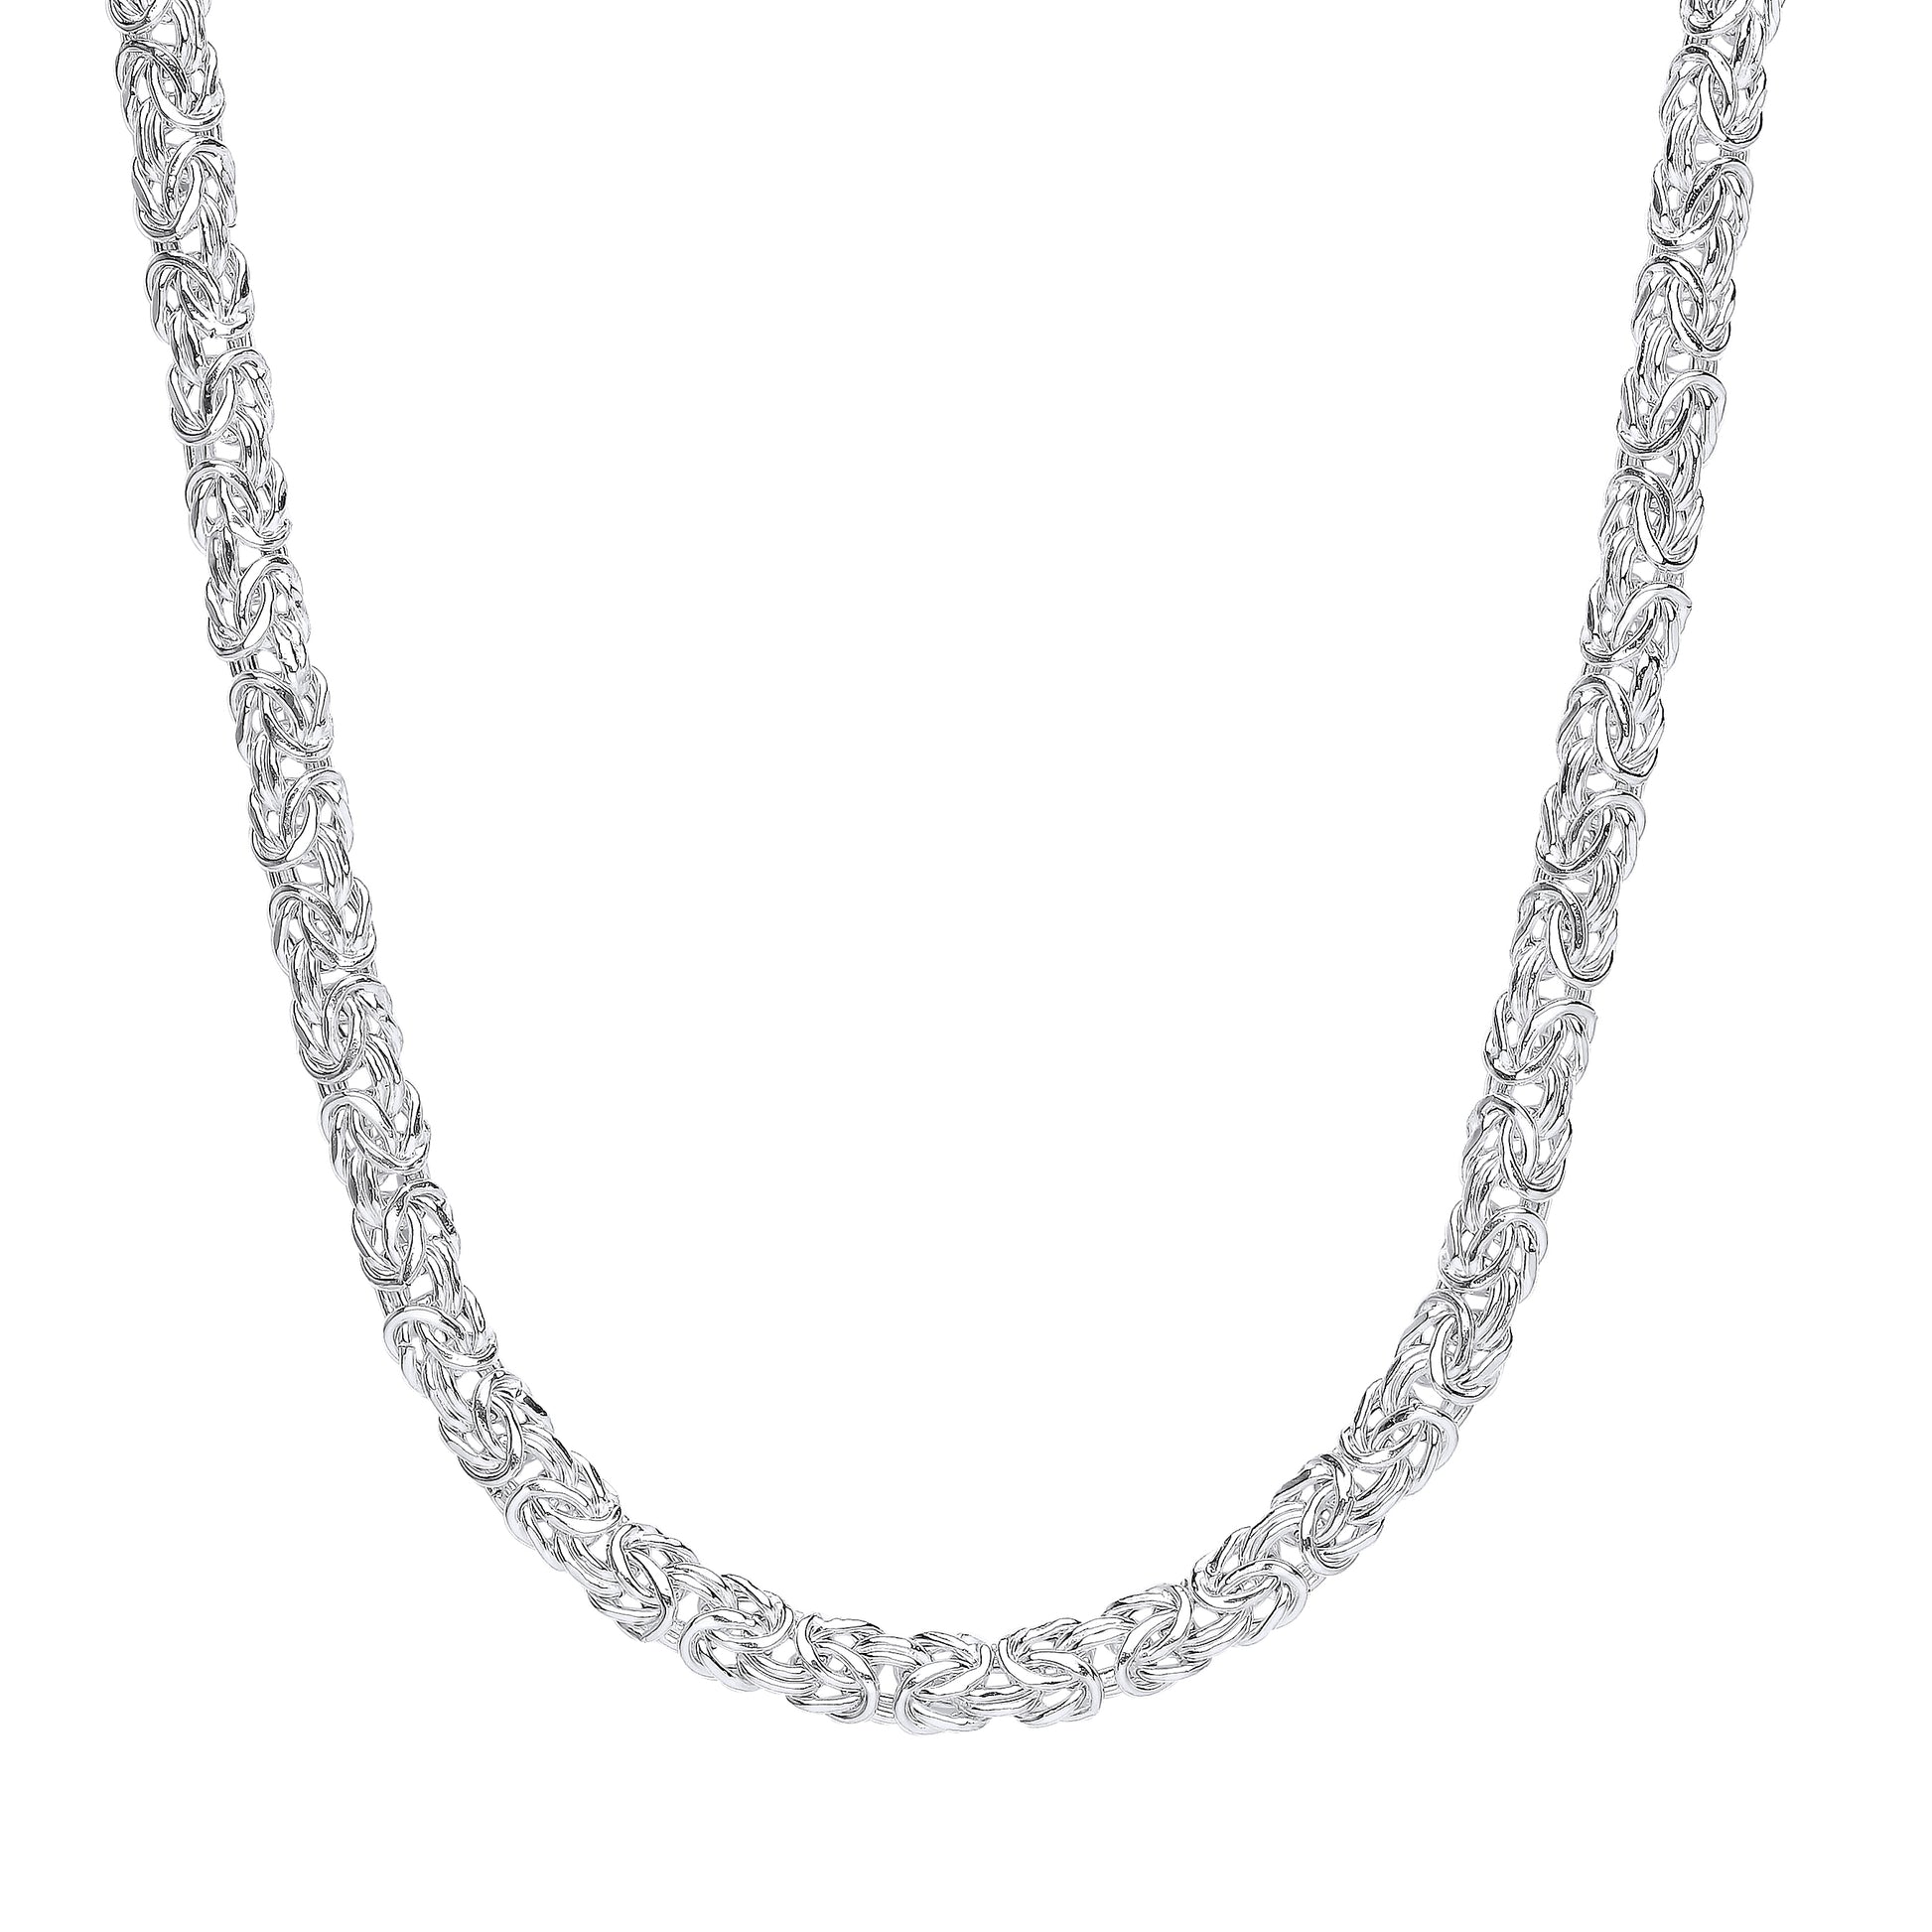 Silver  3D Square Byzantine Chain Necklace 16" + 2" - GVK430